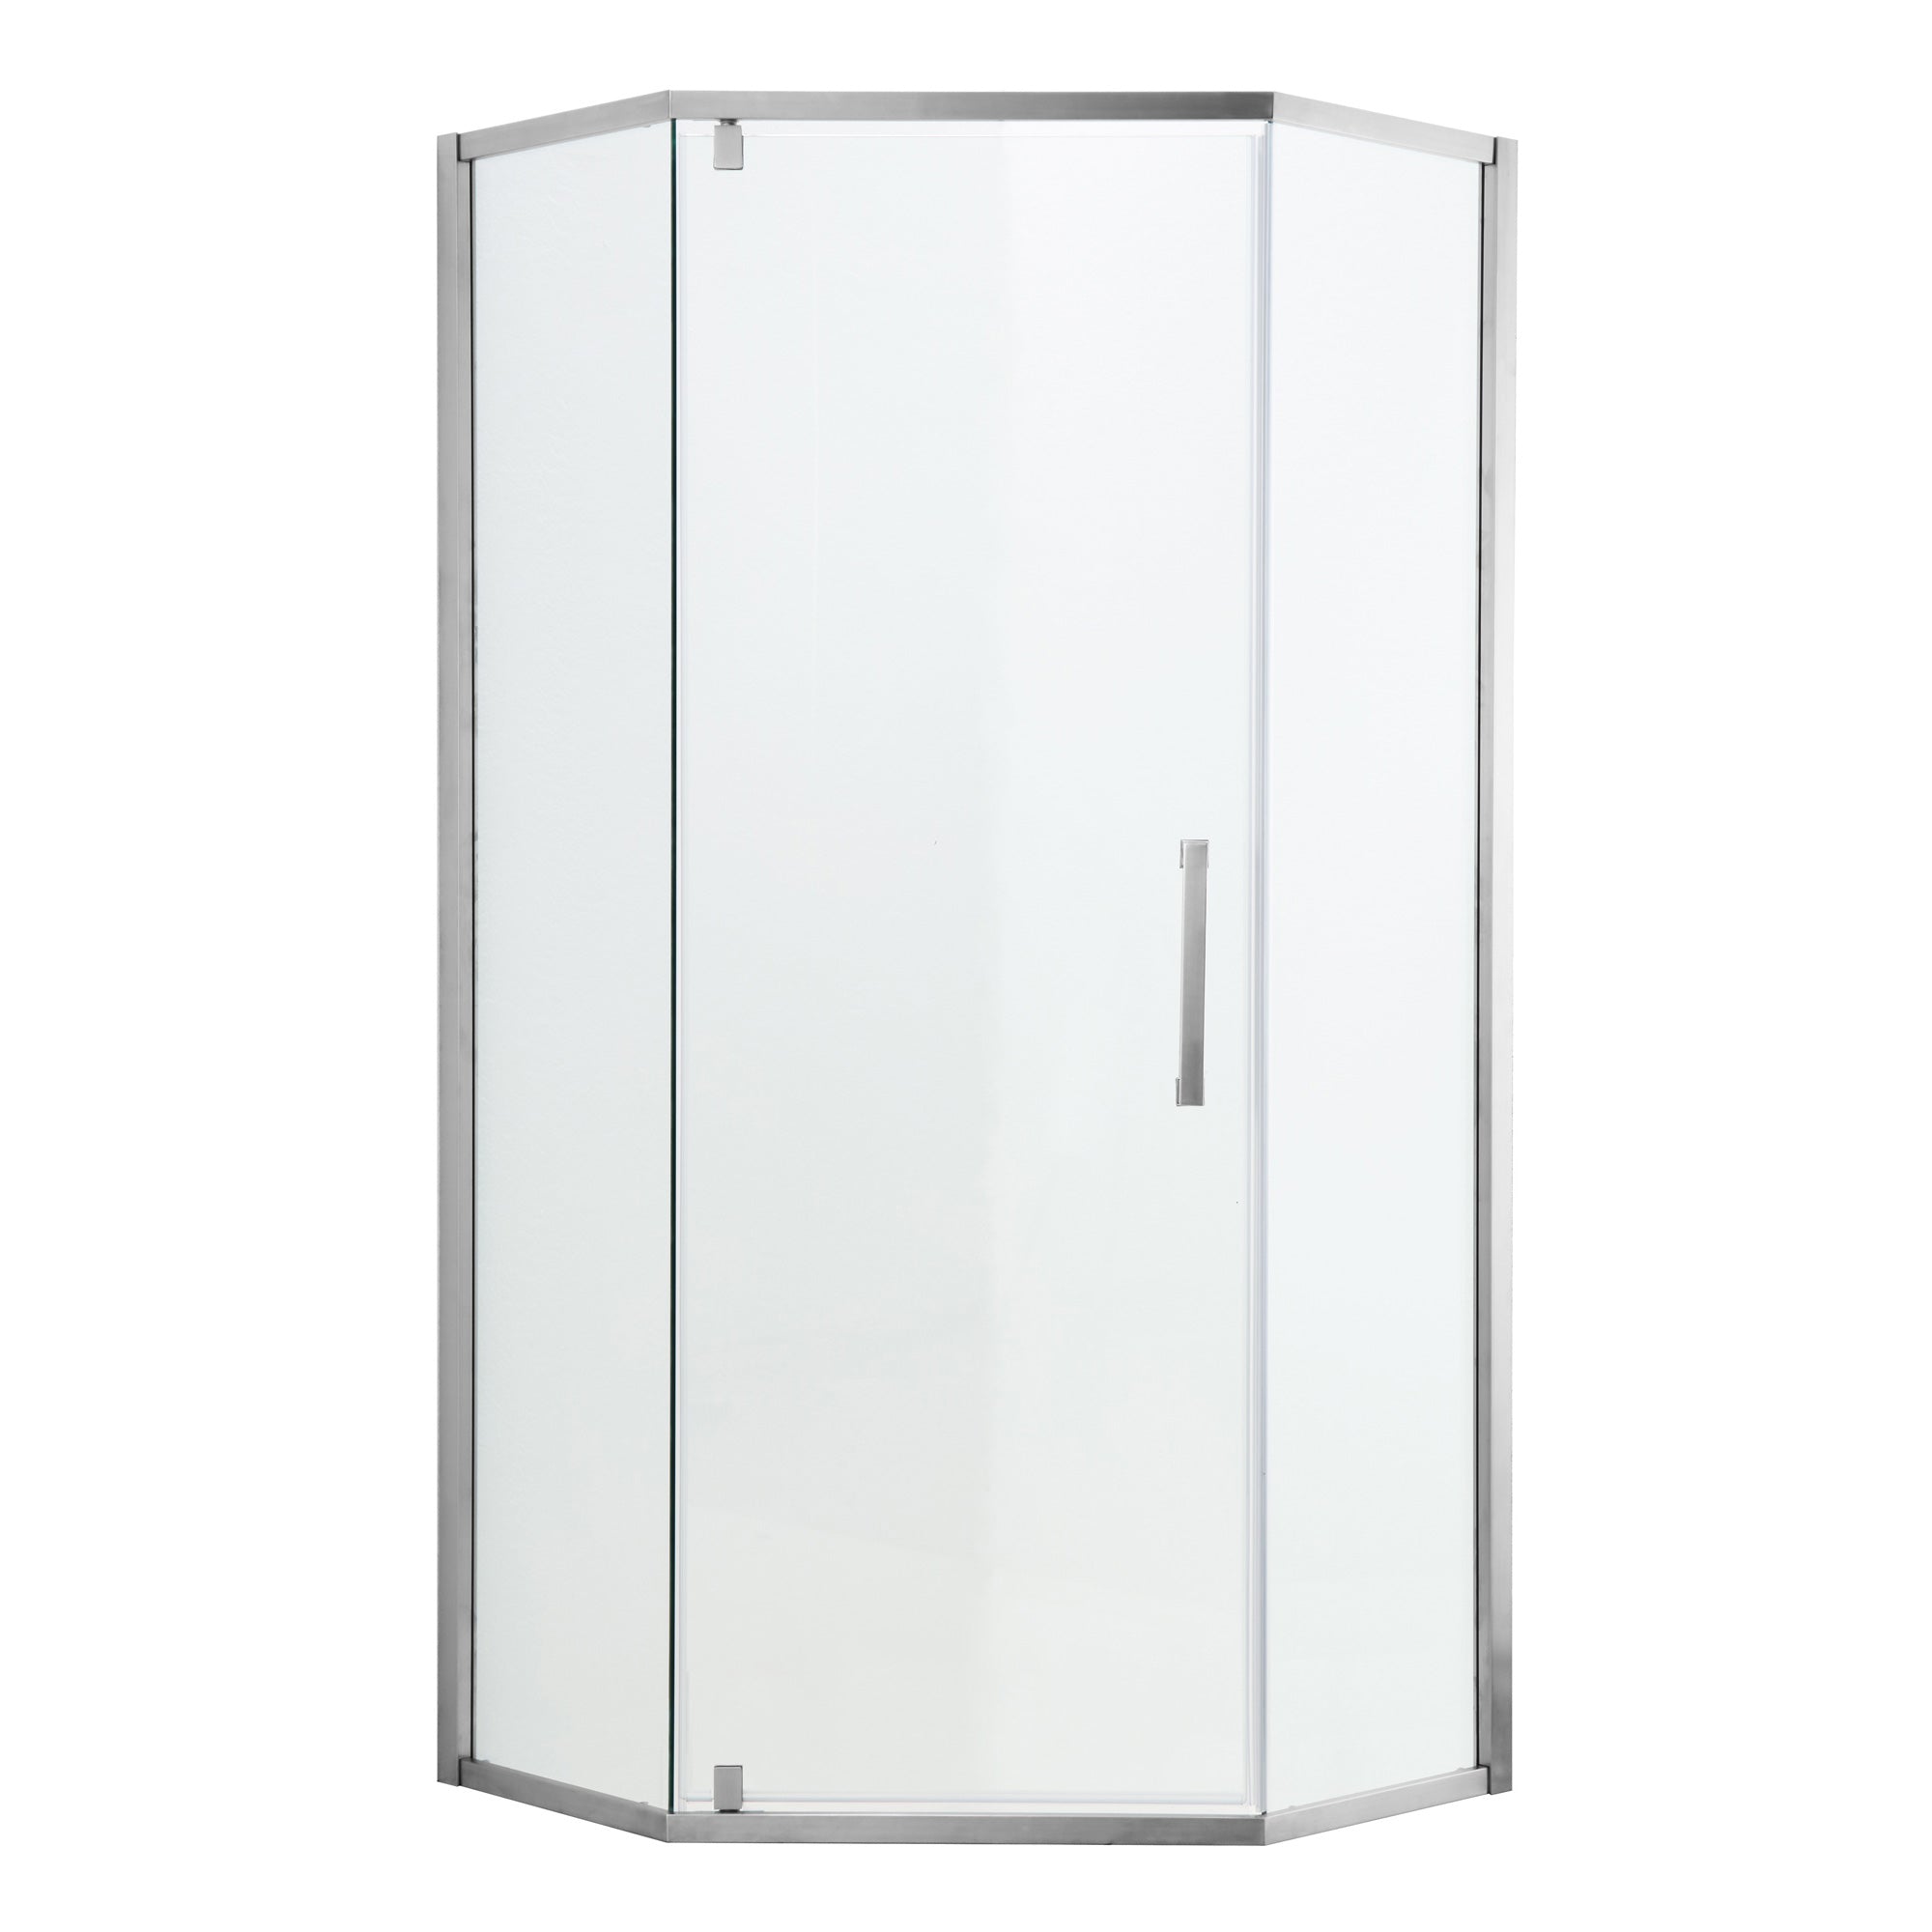 34-1/8" x 72" Semi-Frameless Neo-Angle Hinged Shower Enclosure in Chrome RX-SD06-3472CH